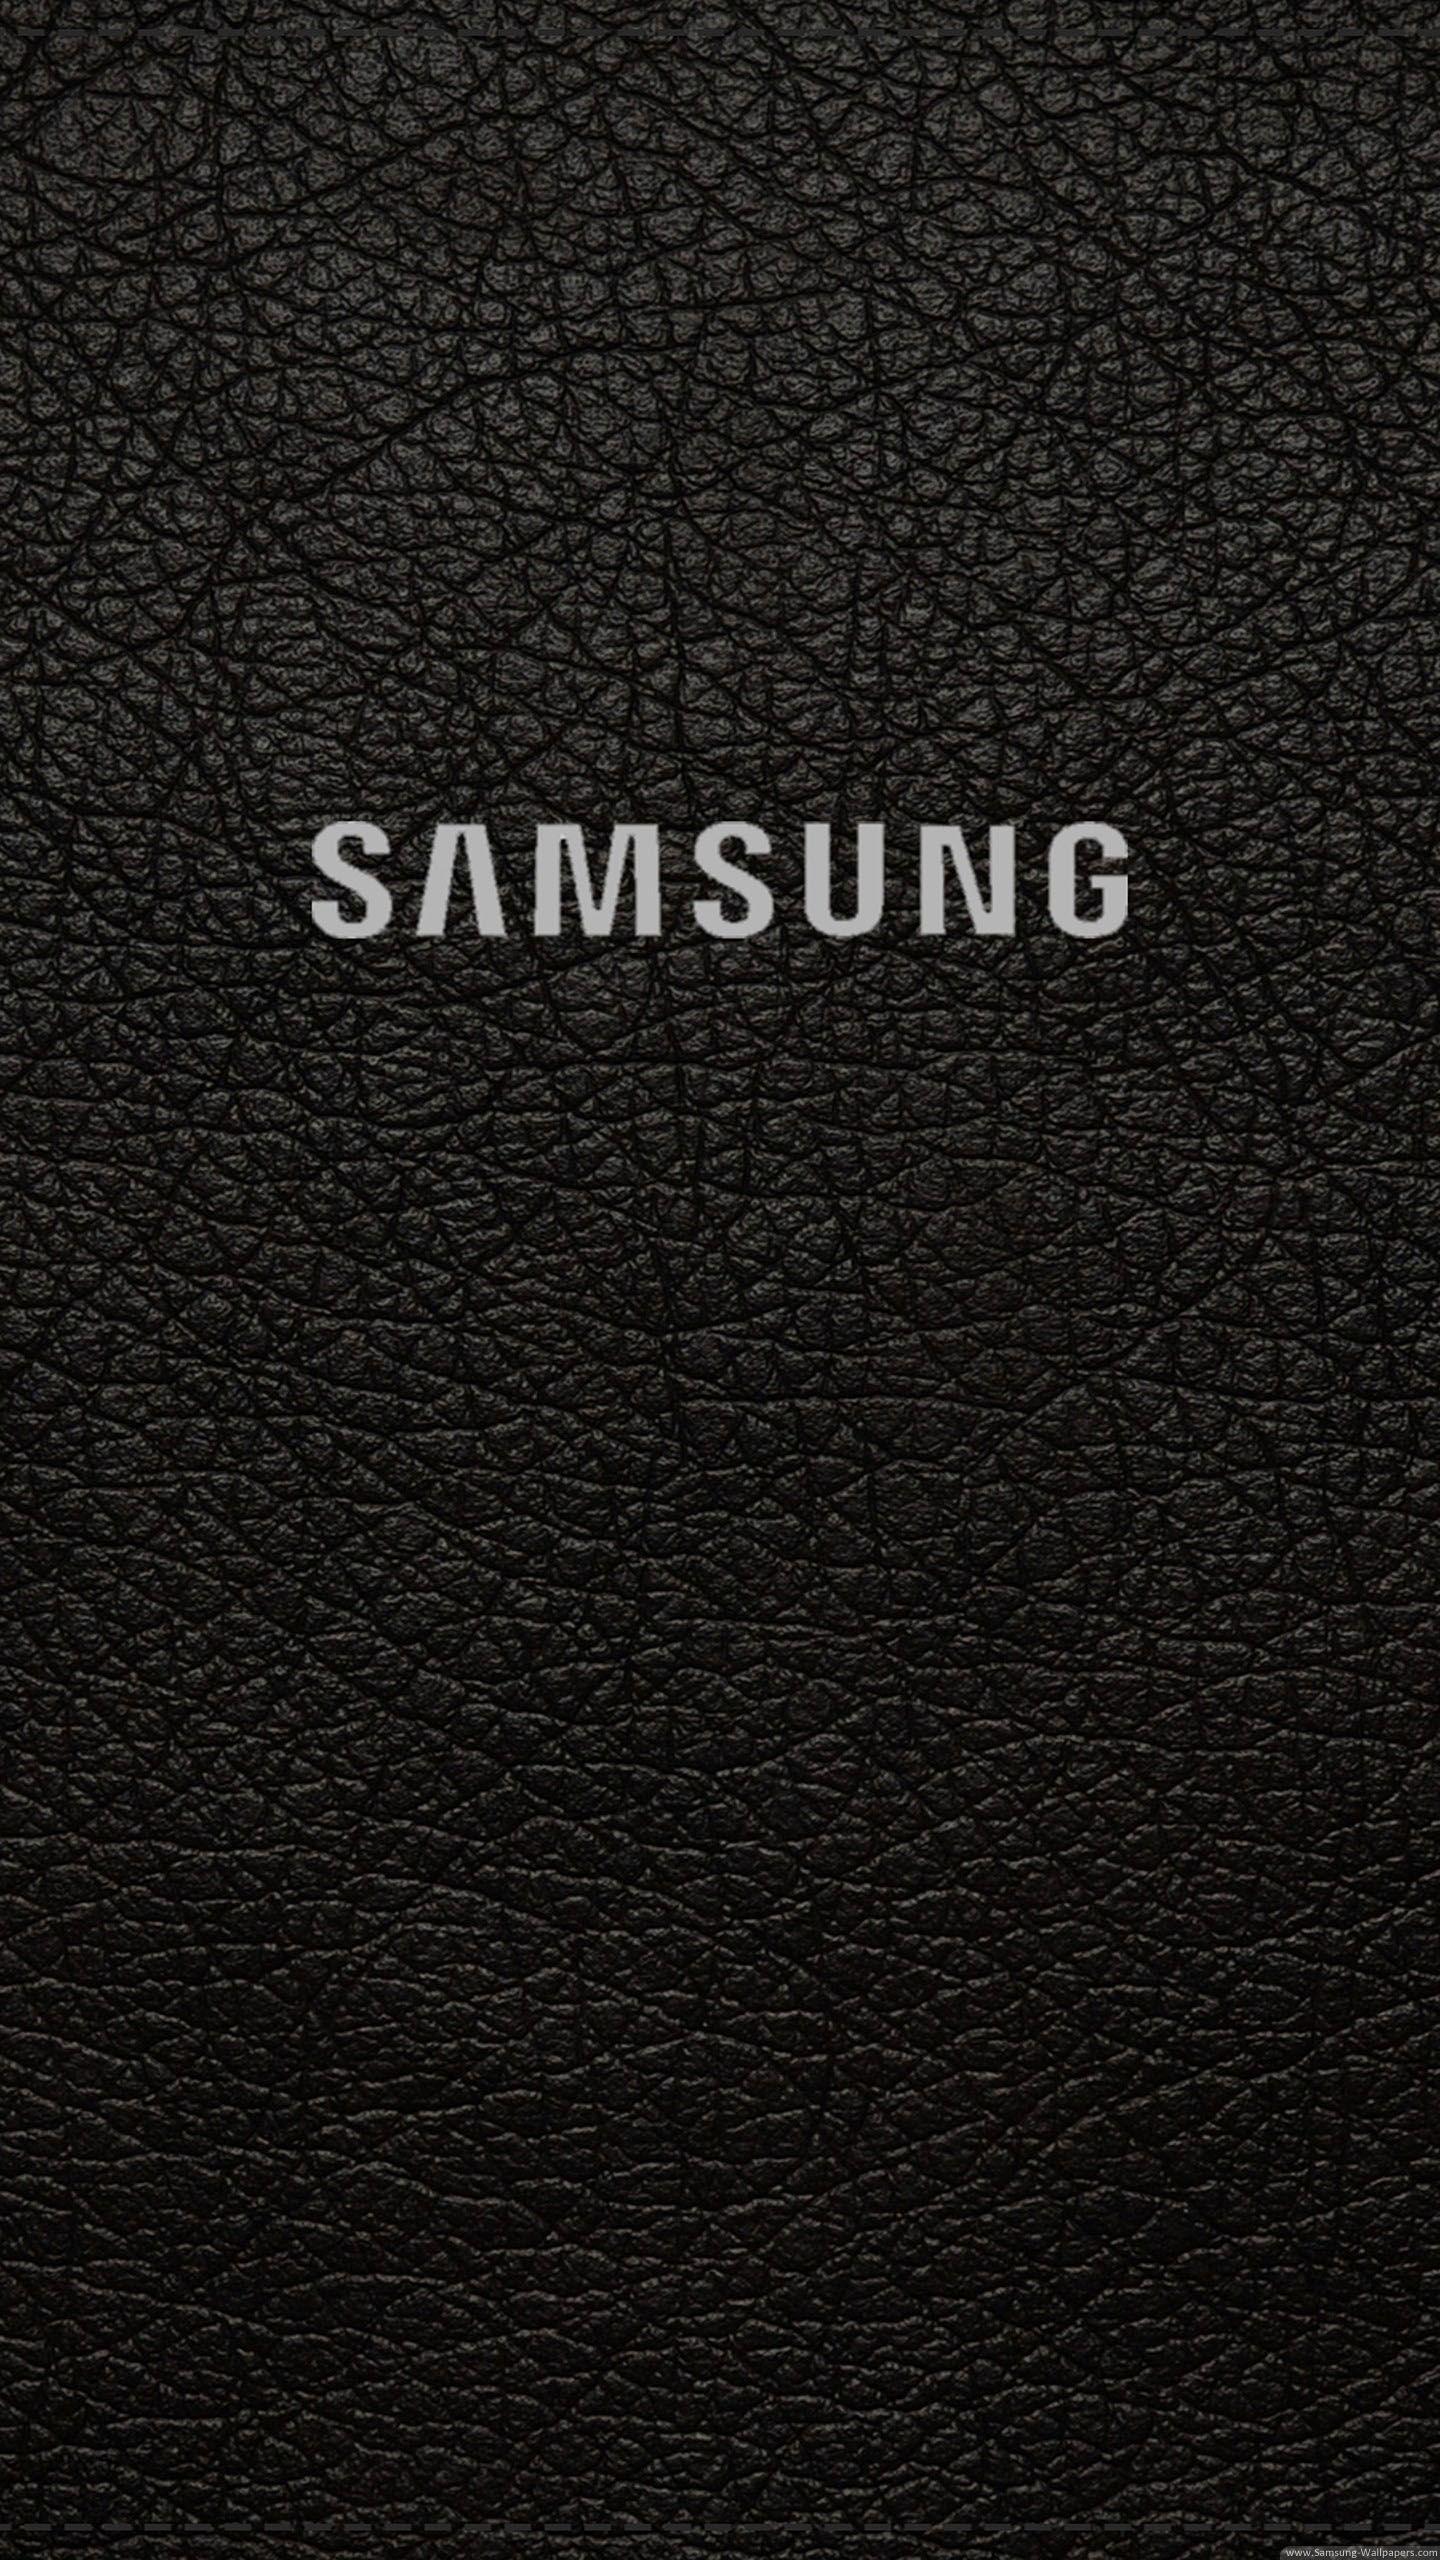 Samsung Galaxy Note 20 Wallpapers & Live Wallpapers - Technastic